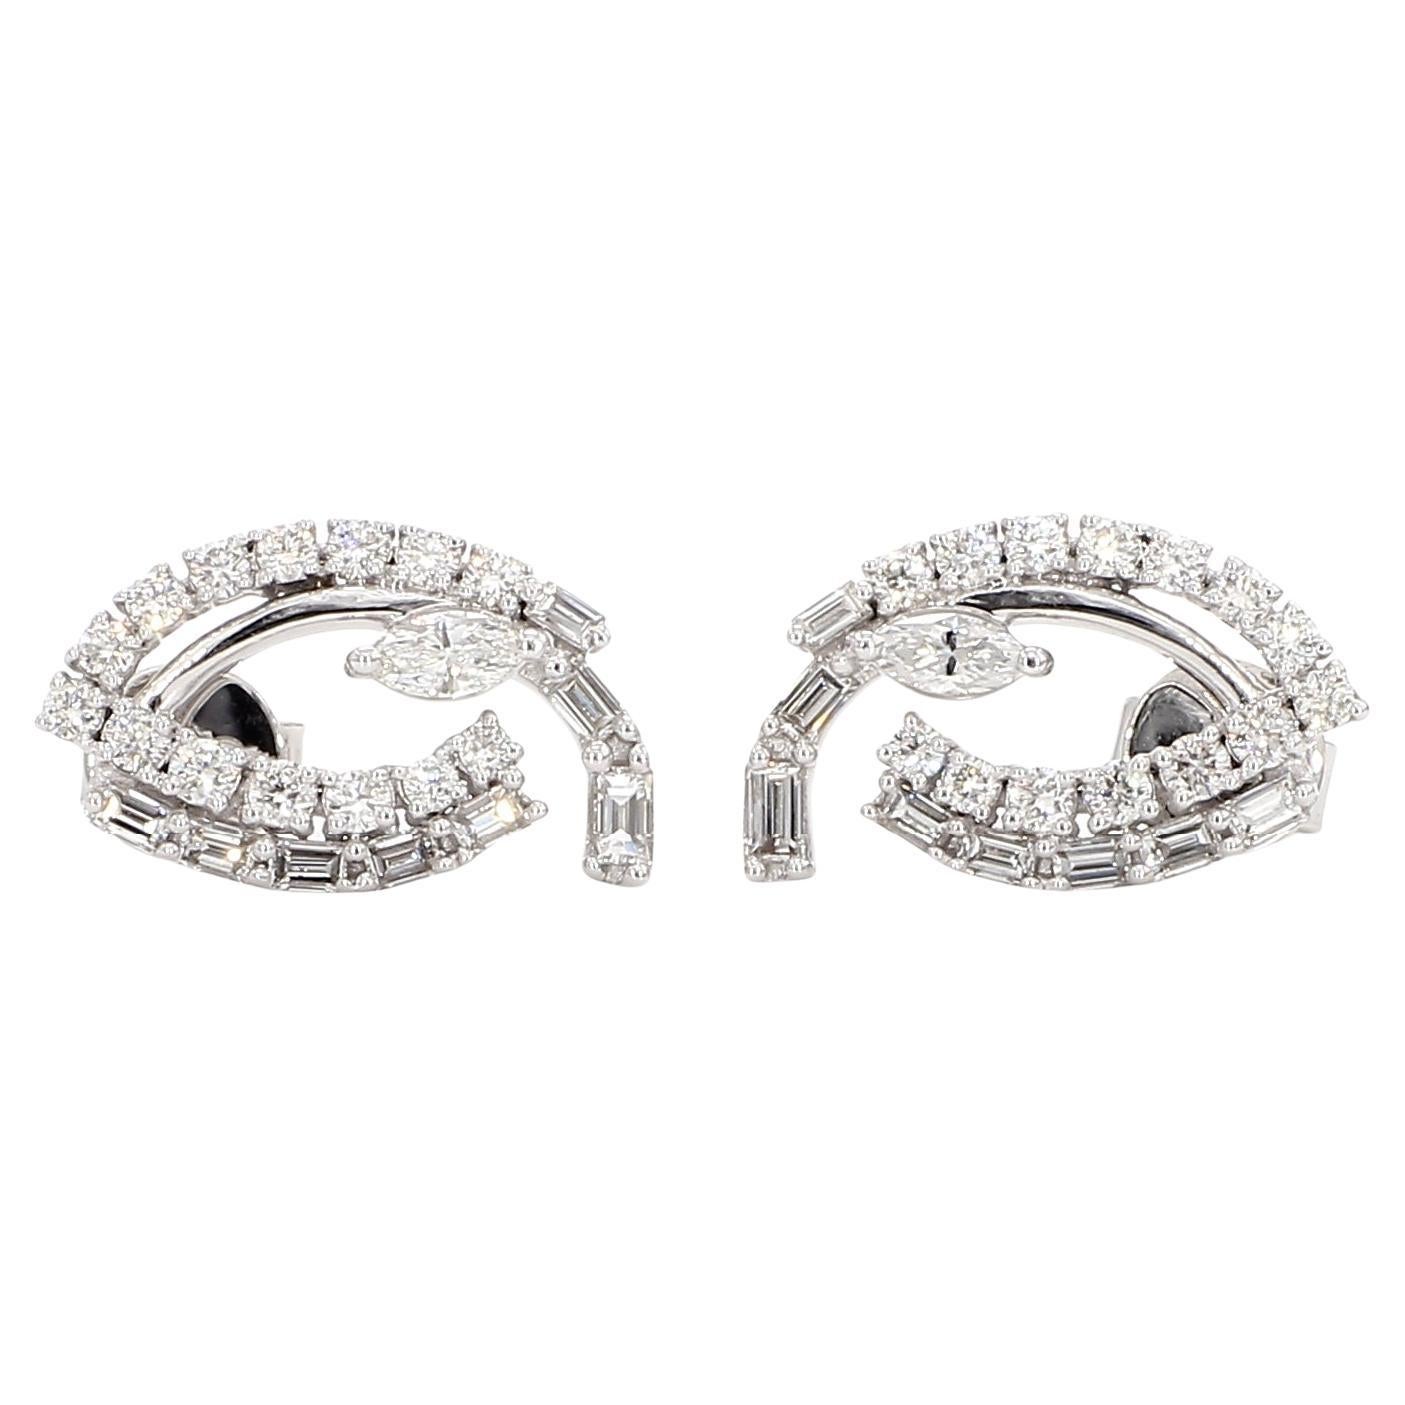 Natural White Marquise Diamond 1.16 Carat TW White Gold Stud Earrings